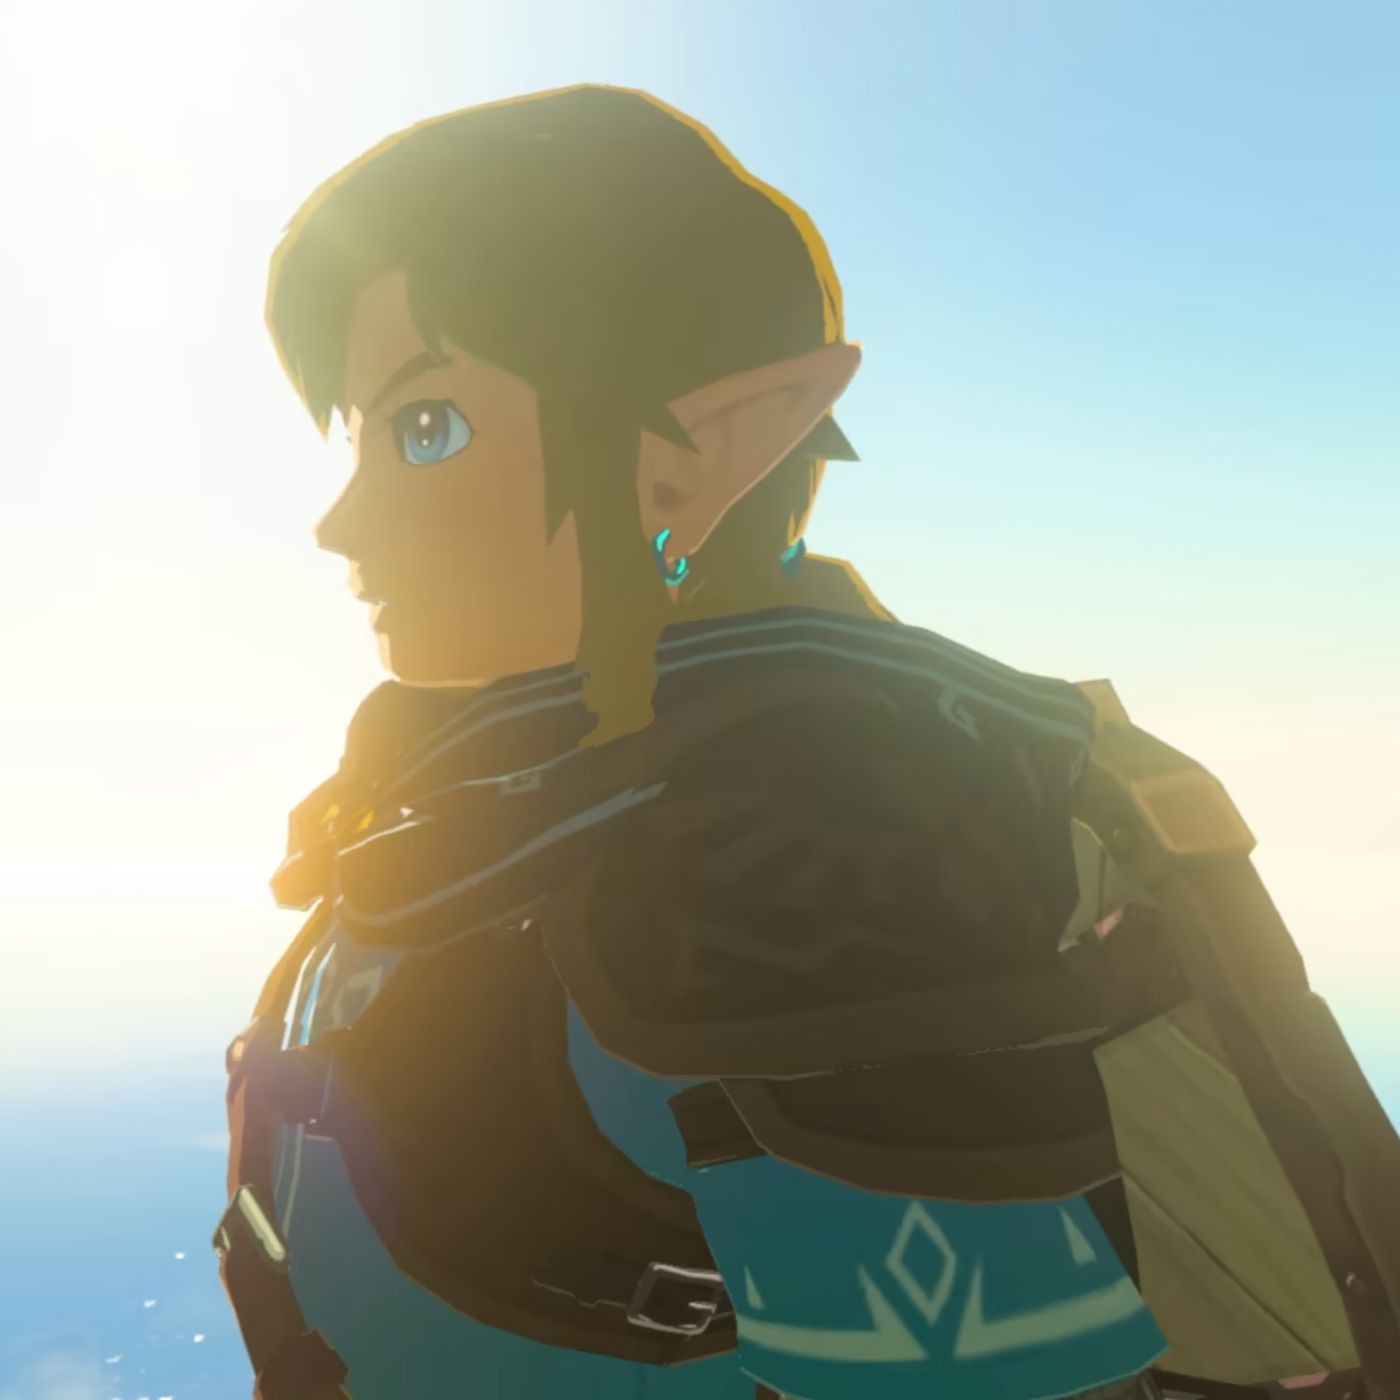 Is The Legend Of Zelda Movie Happening? Here Is What We Know So Far